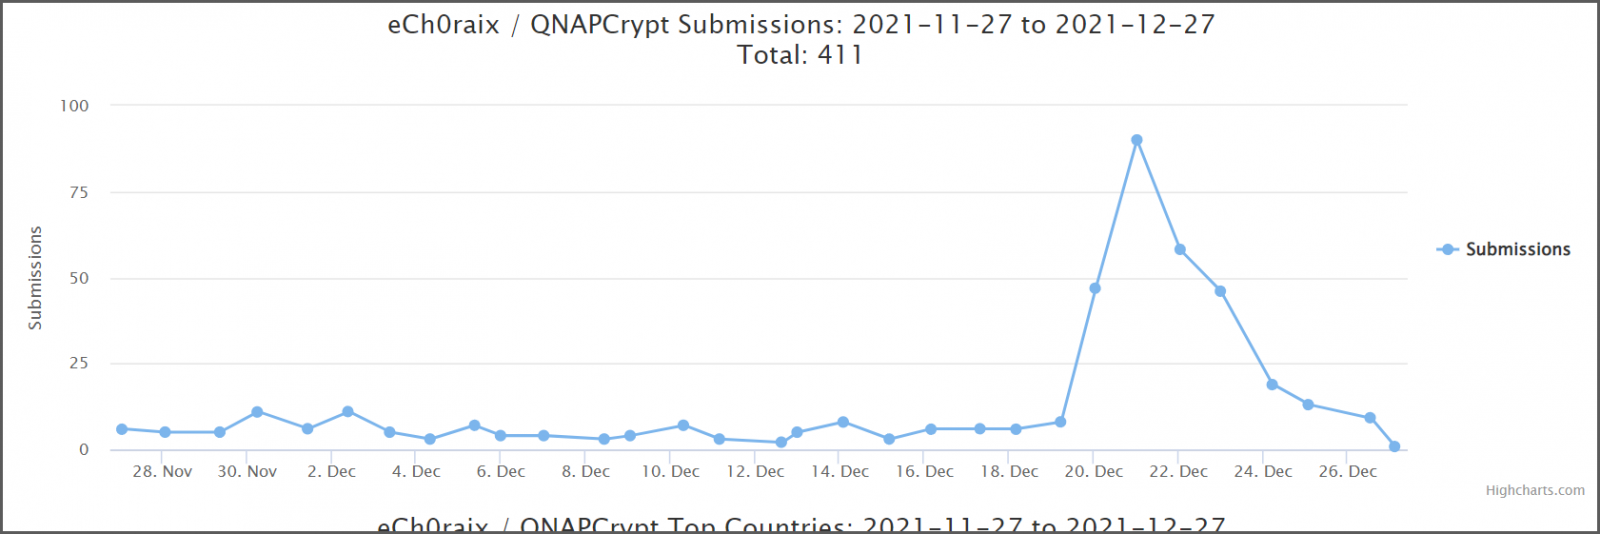 Spike of ech0raix ransomware submissions on ID Ransomware service